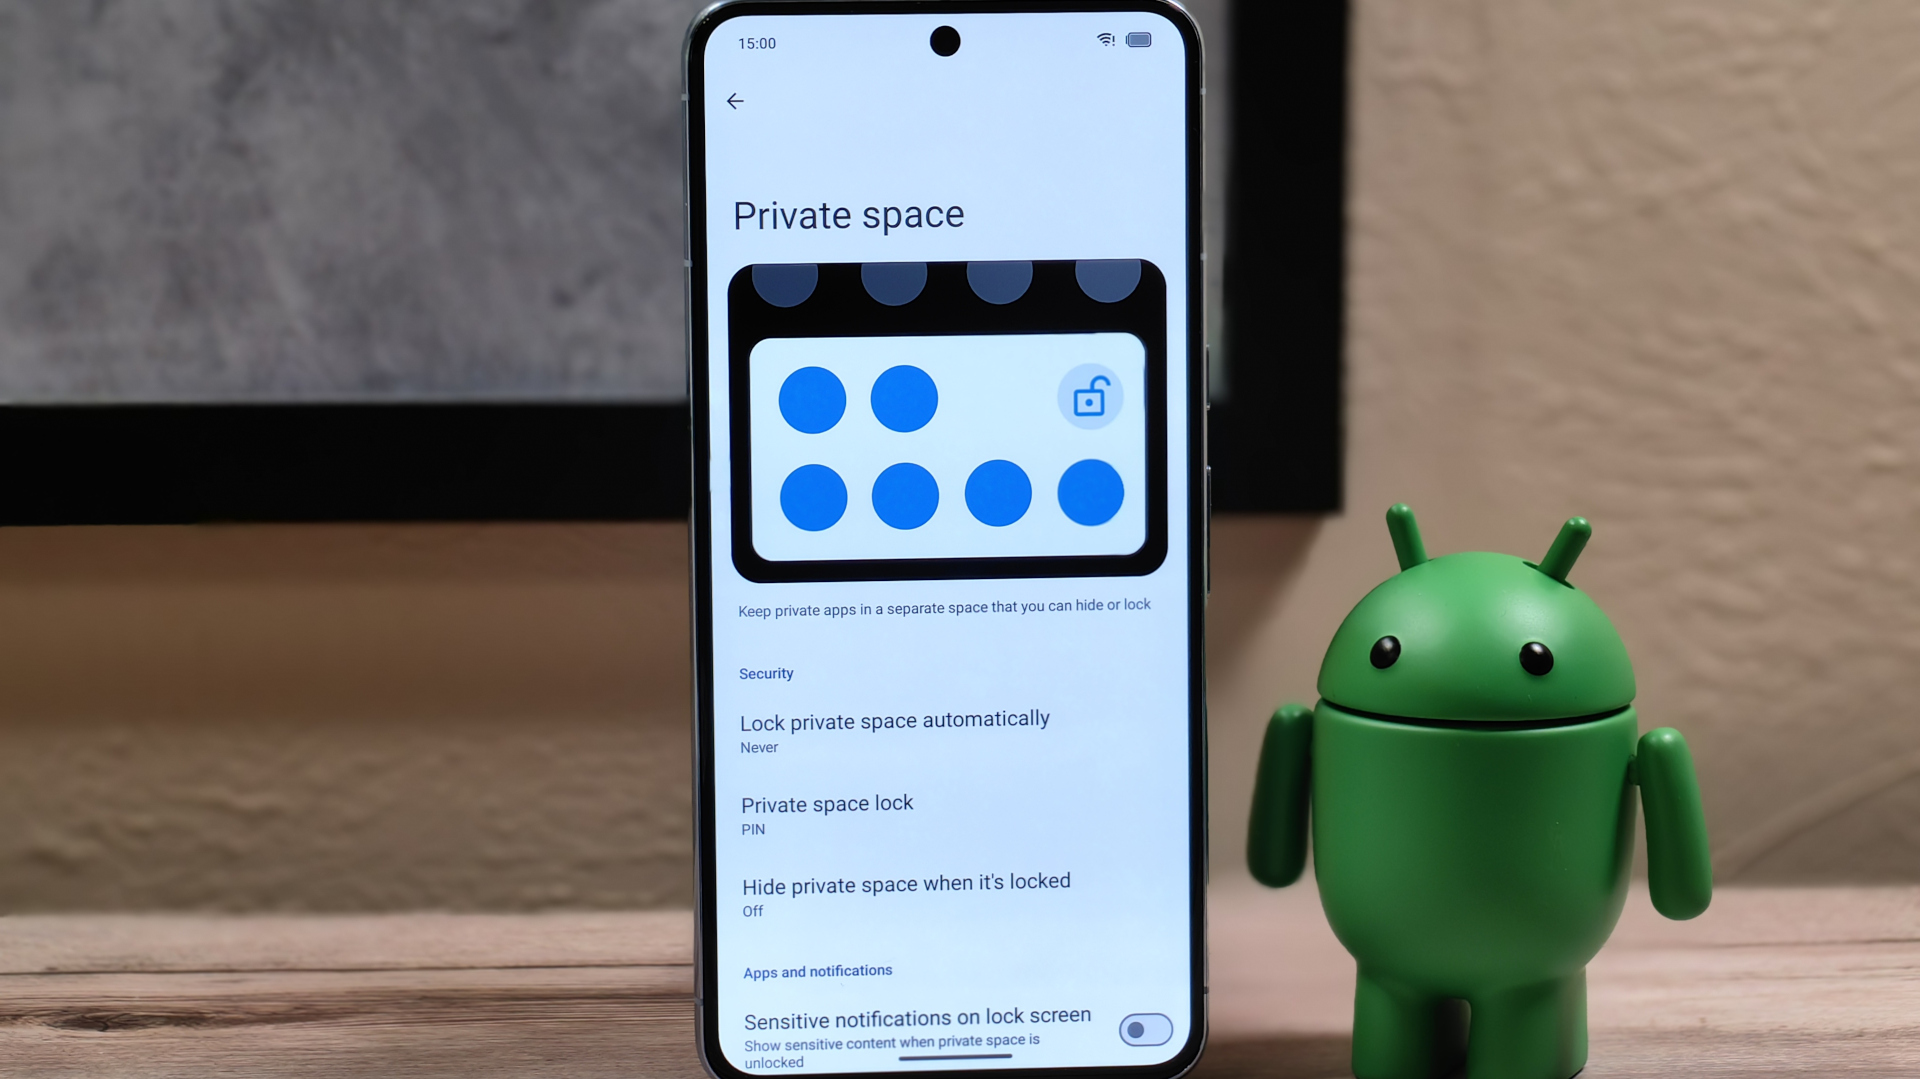 Android 15’s Private Space is getting more features to hide your apps and notifications